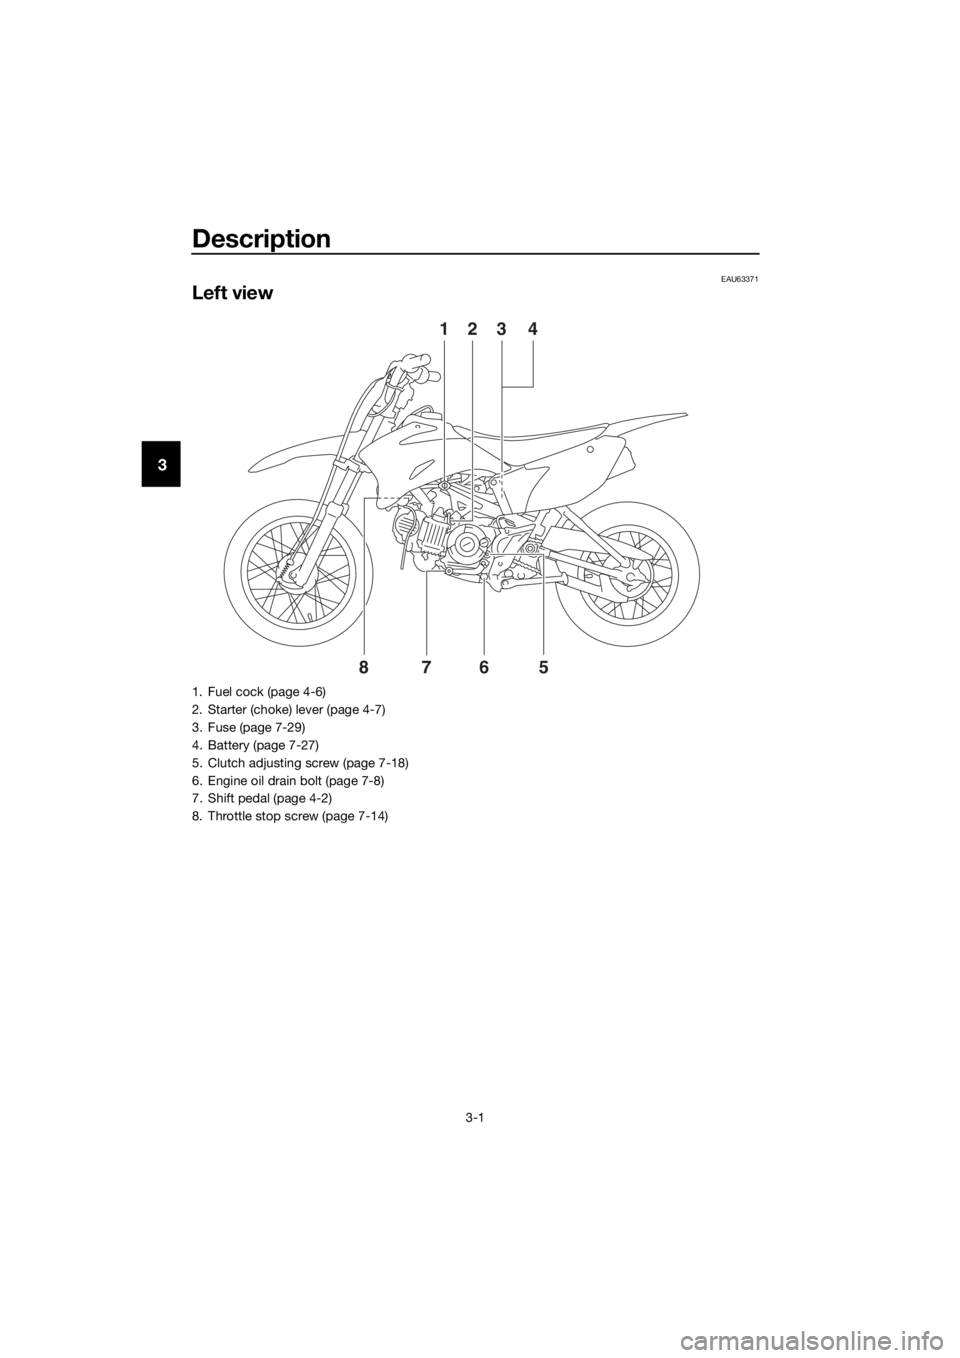 YAMAHA TT-R110E 2018  Owners Manual Description
3-1
3
EAU63371
Left view
678
123 45
1. Fuel cock (page 4-6)
2. Starter (choke) lever (page 4-7)
3. Fuse (page 7-29)
4. Battery (page 7-27)
5. Clutch adjusting screw (page 7-18)
6. Engine o